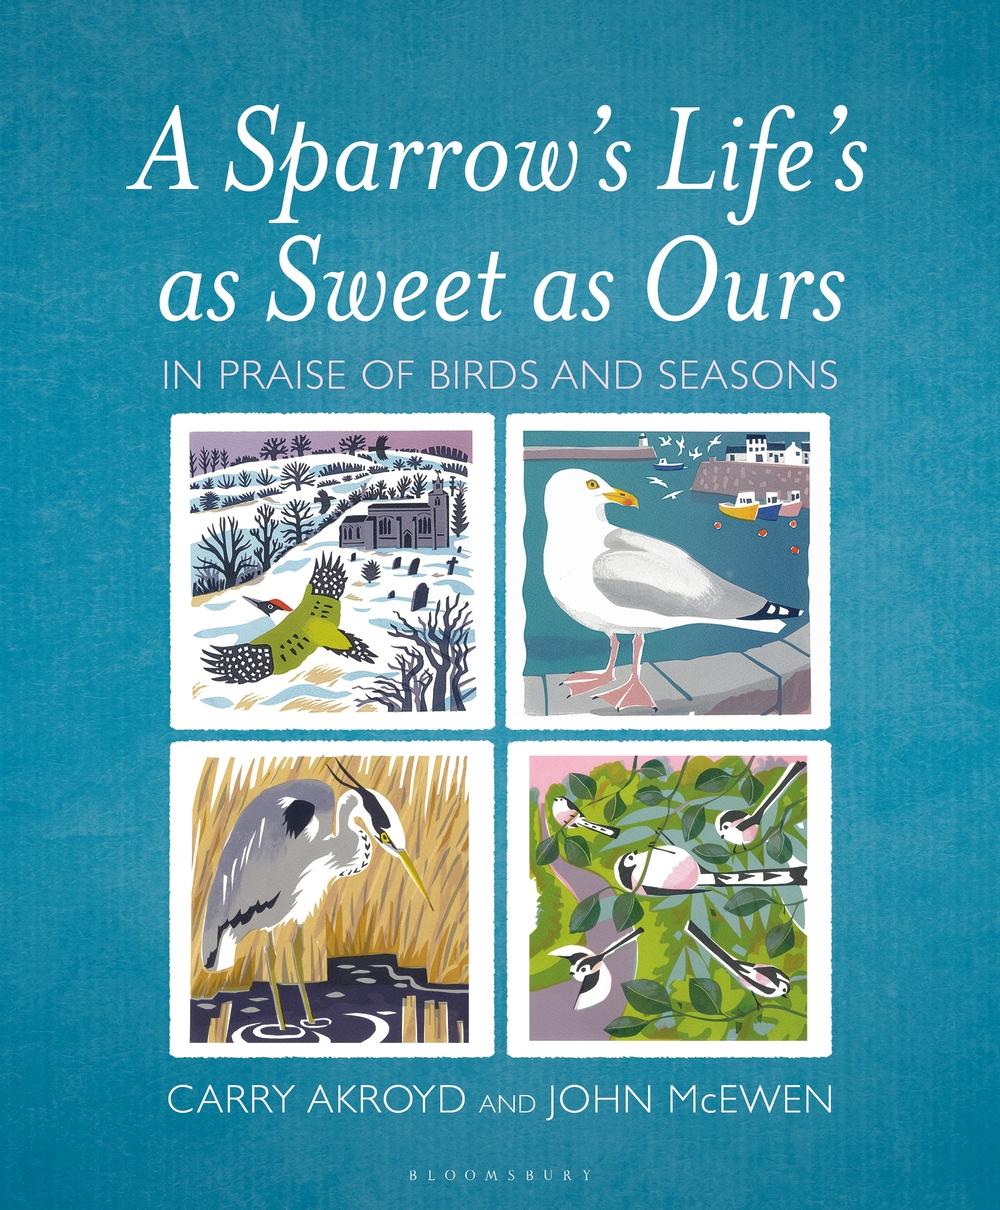 Sparrow's Life's as Sweet as Ours - Carry Akroyd